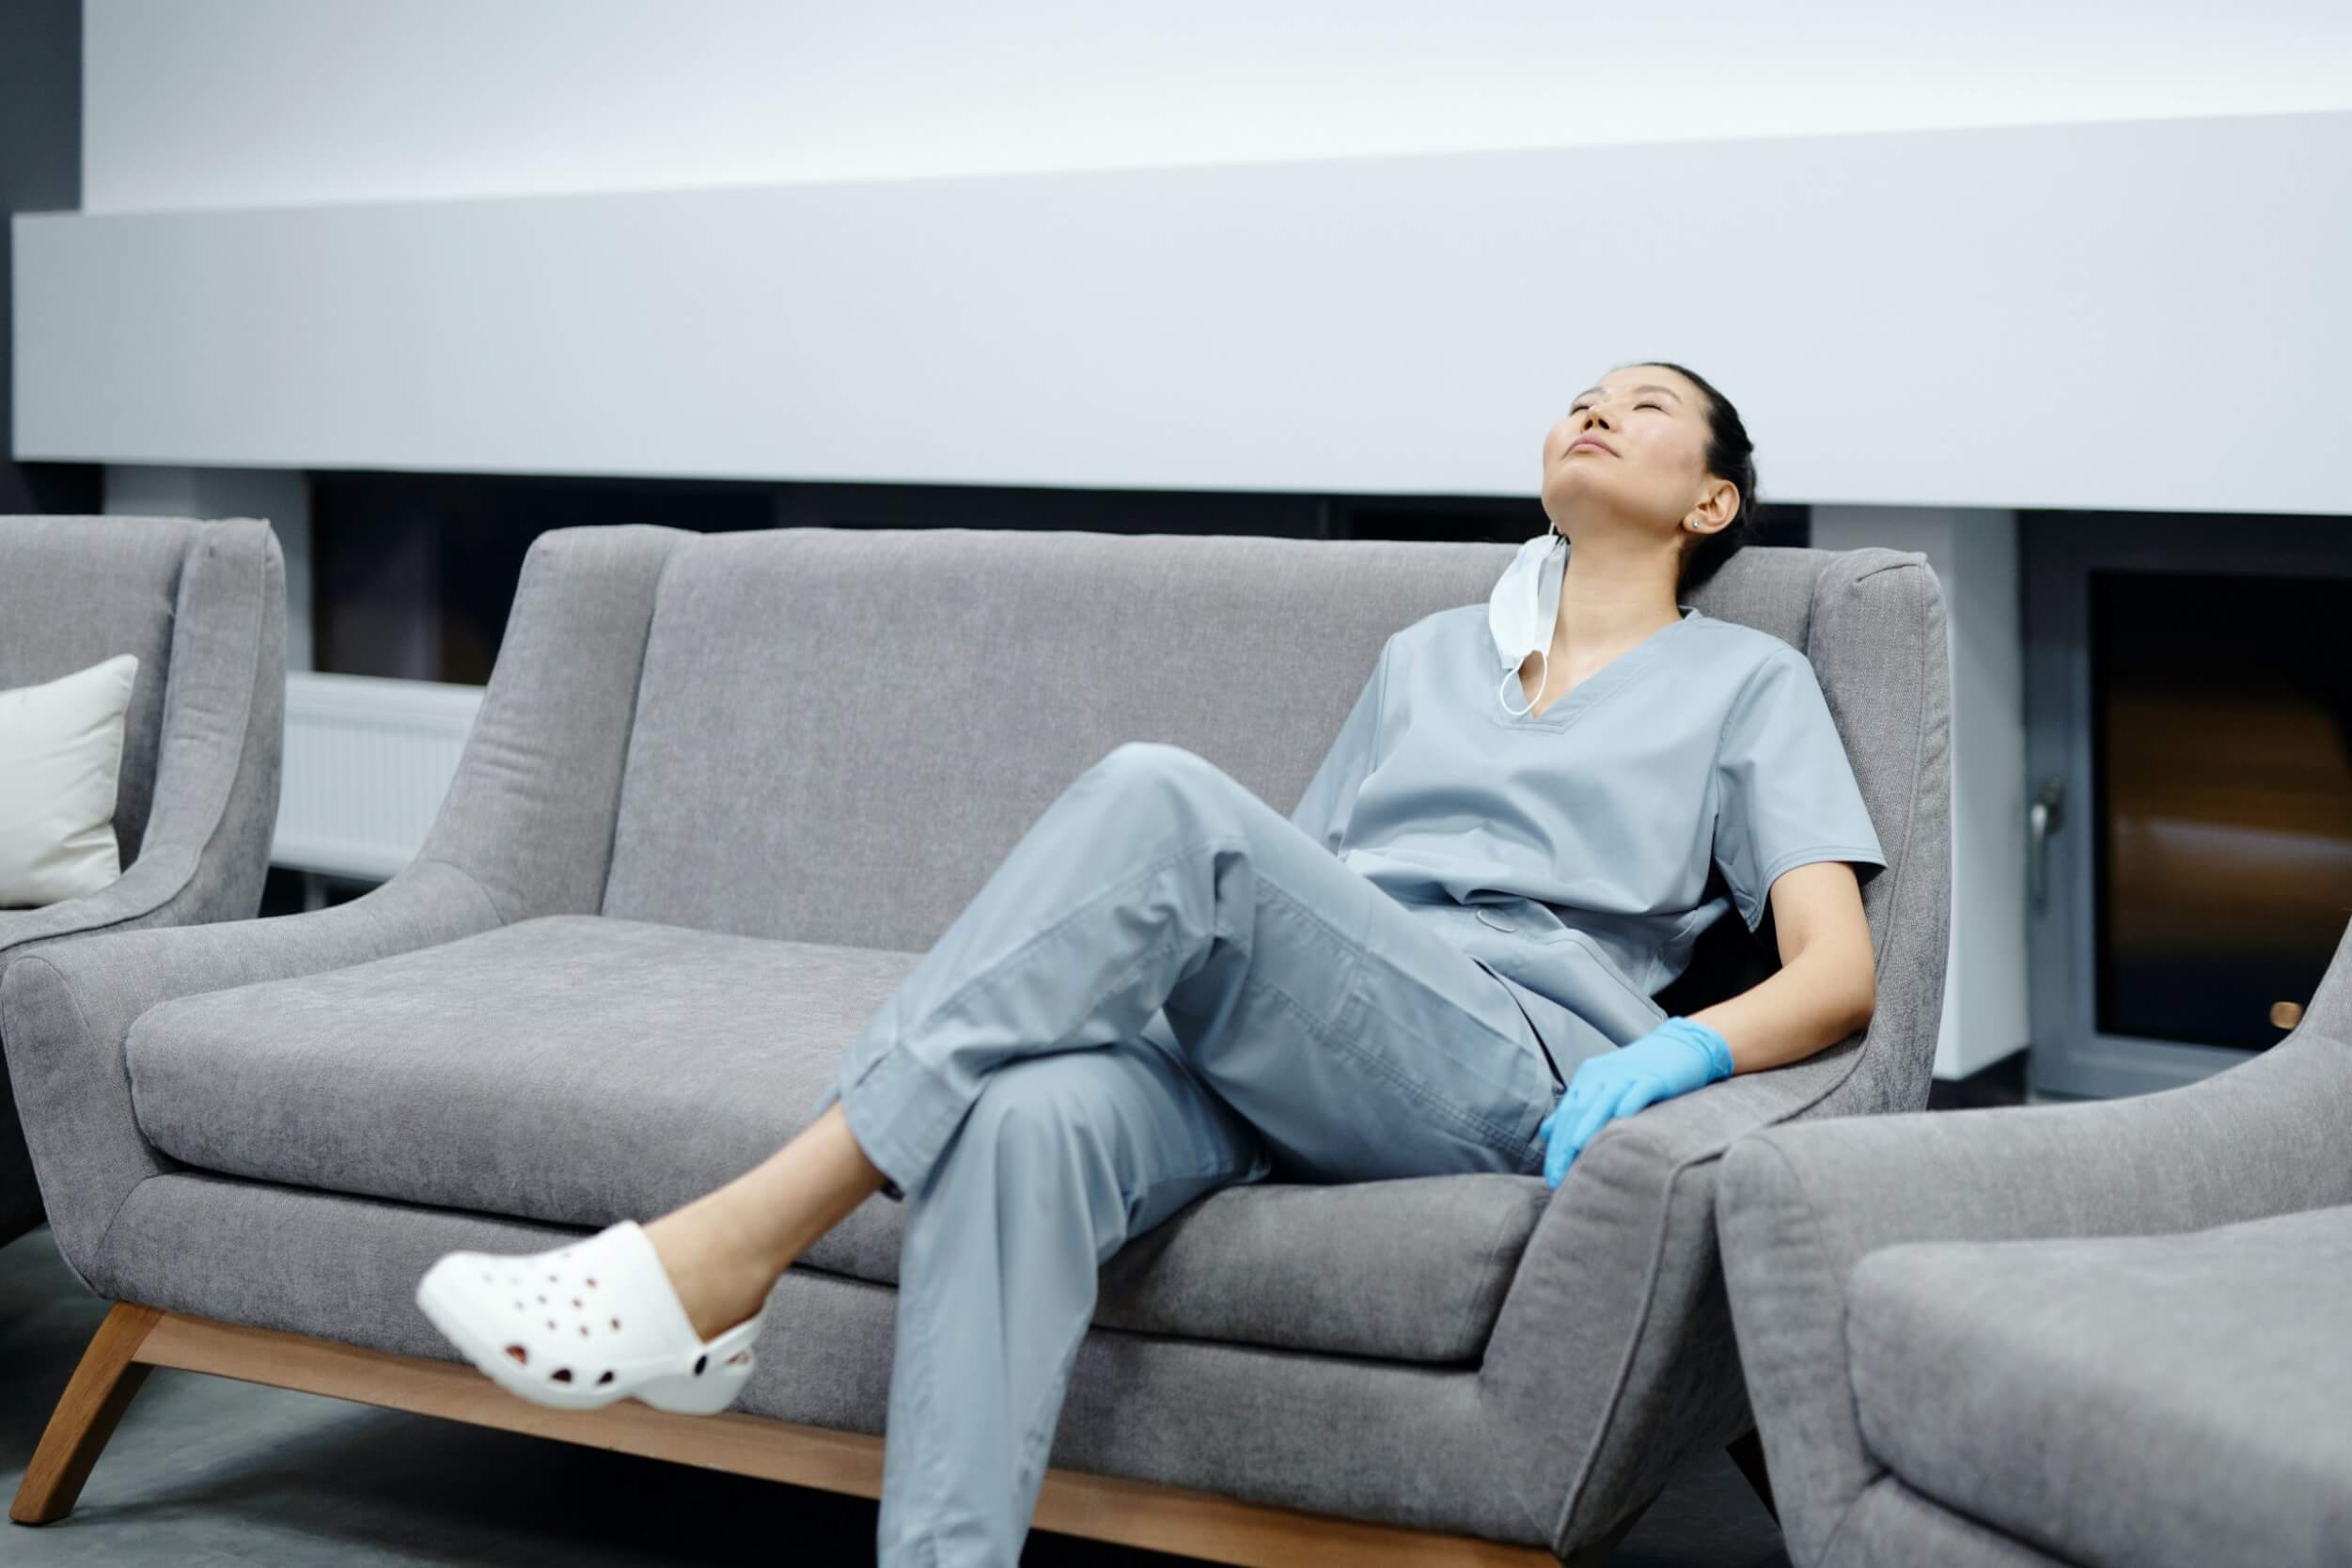 Exhausted nurse sitting on a couch